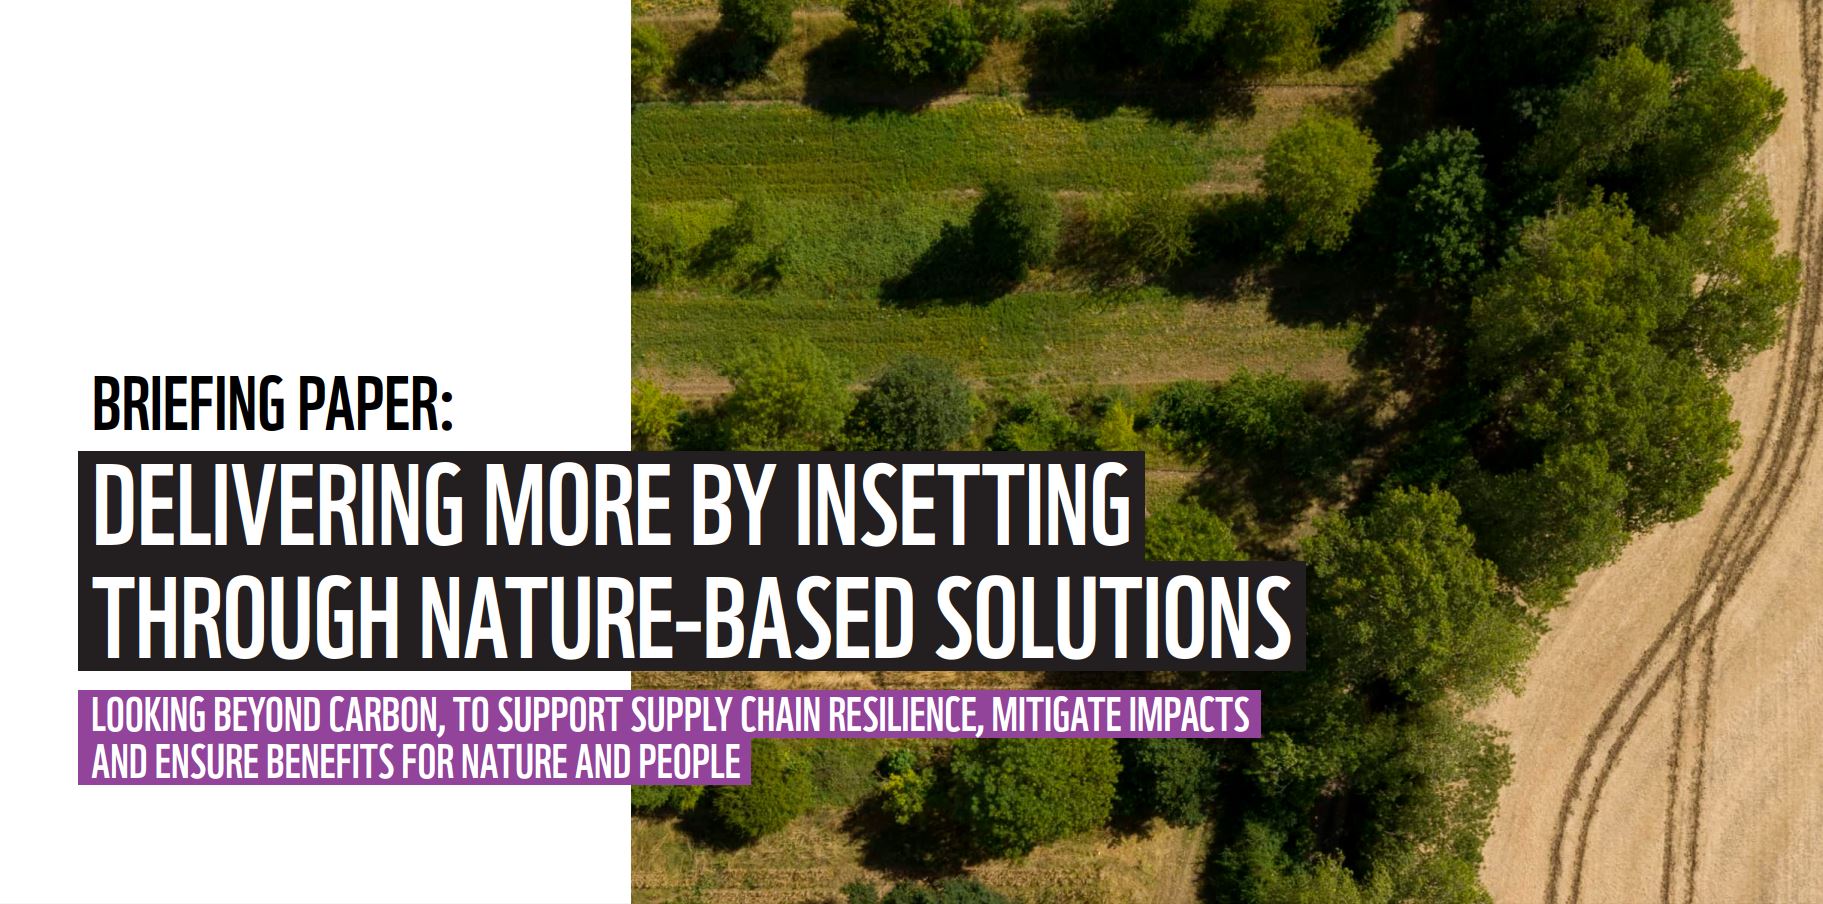 Delivering more insetting through nature-based solutions